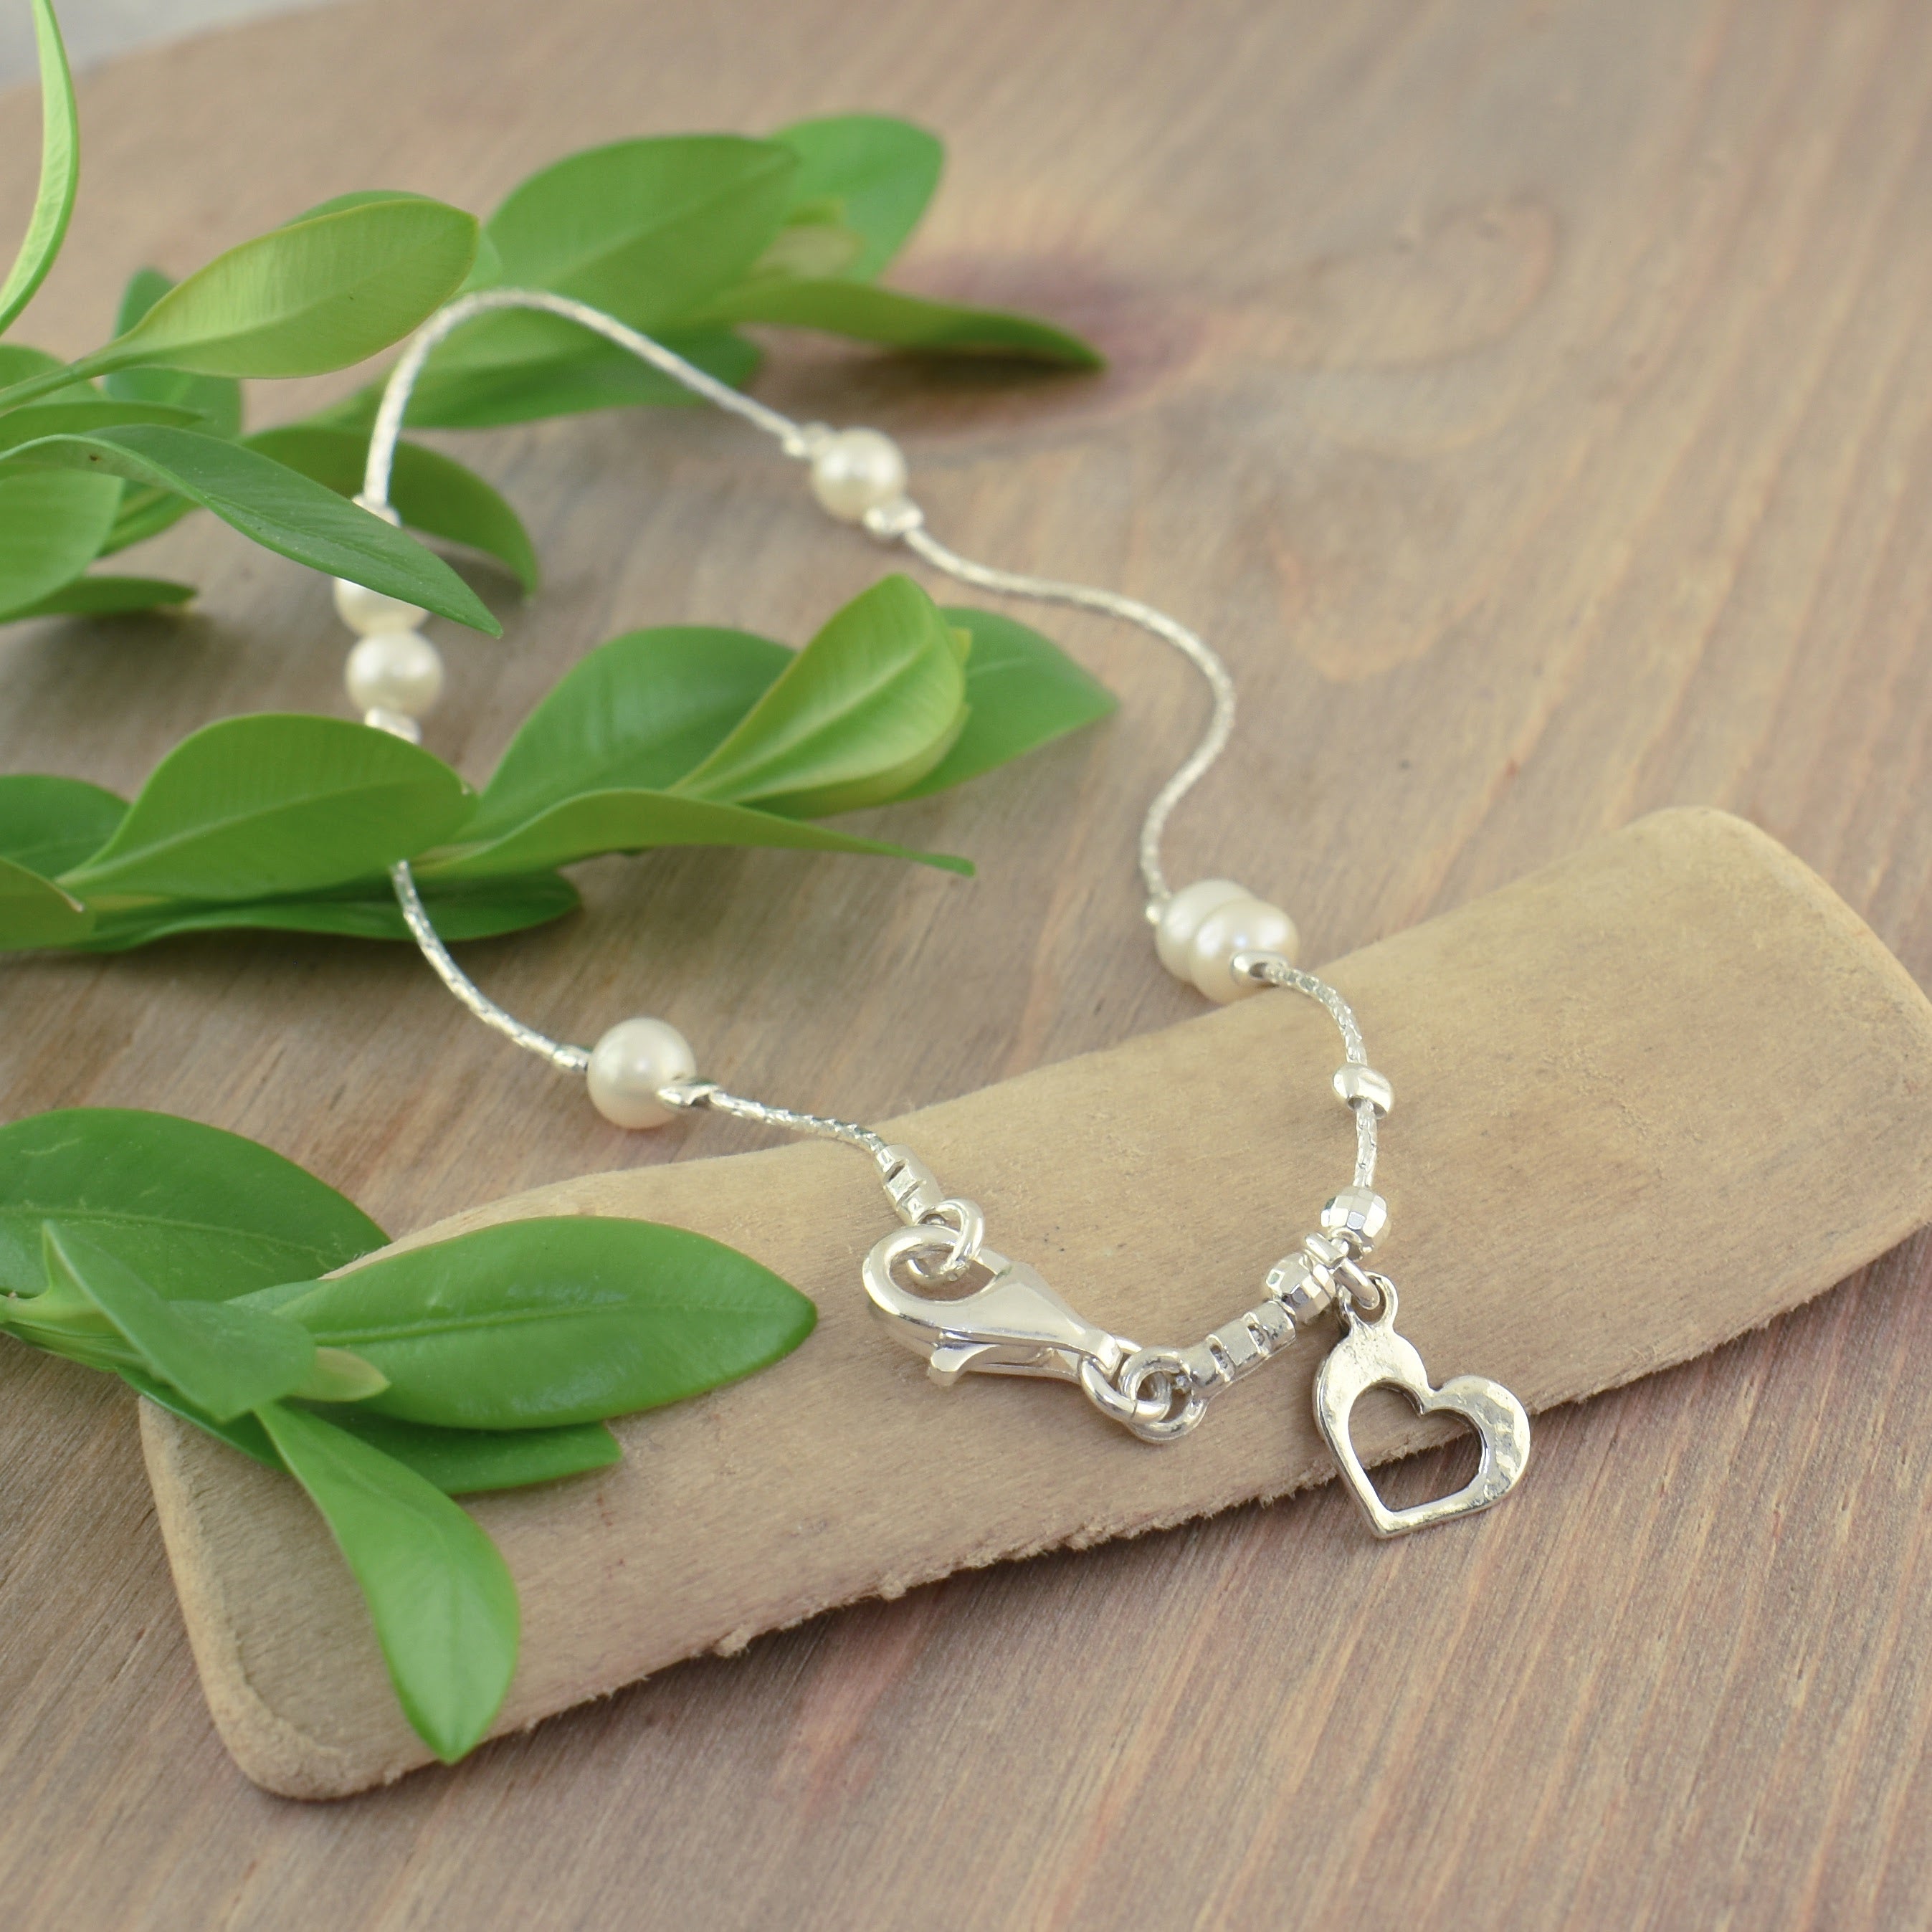 .925 sterling silver anklet featuring freshwater pearls and a dainty hammered heart